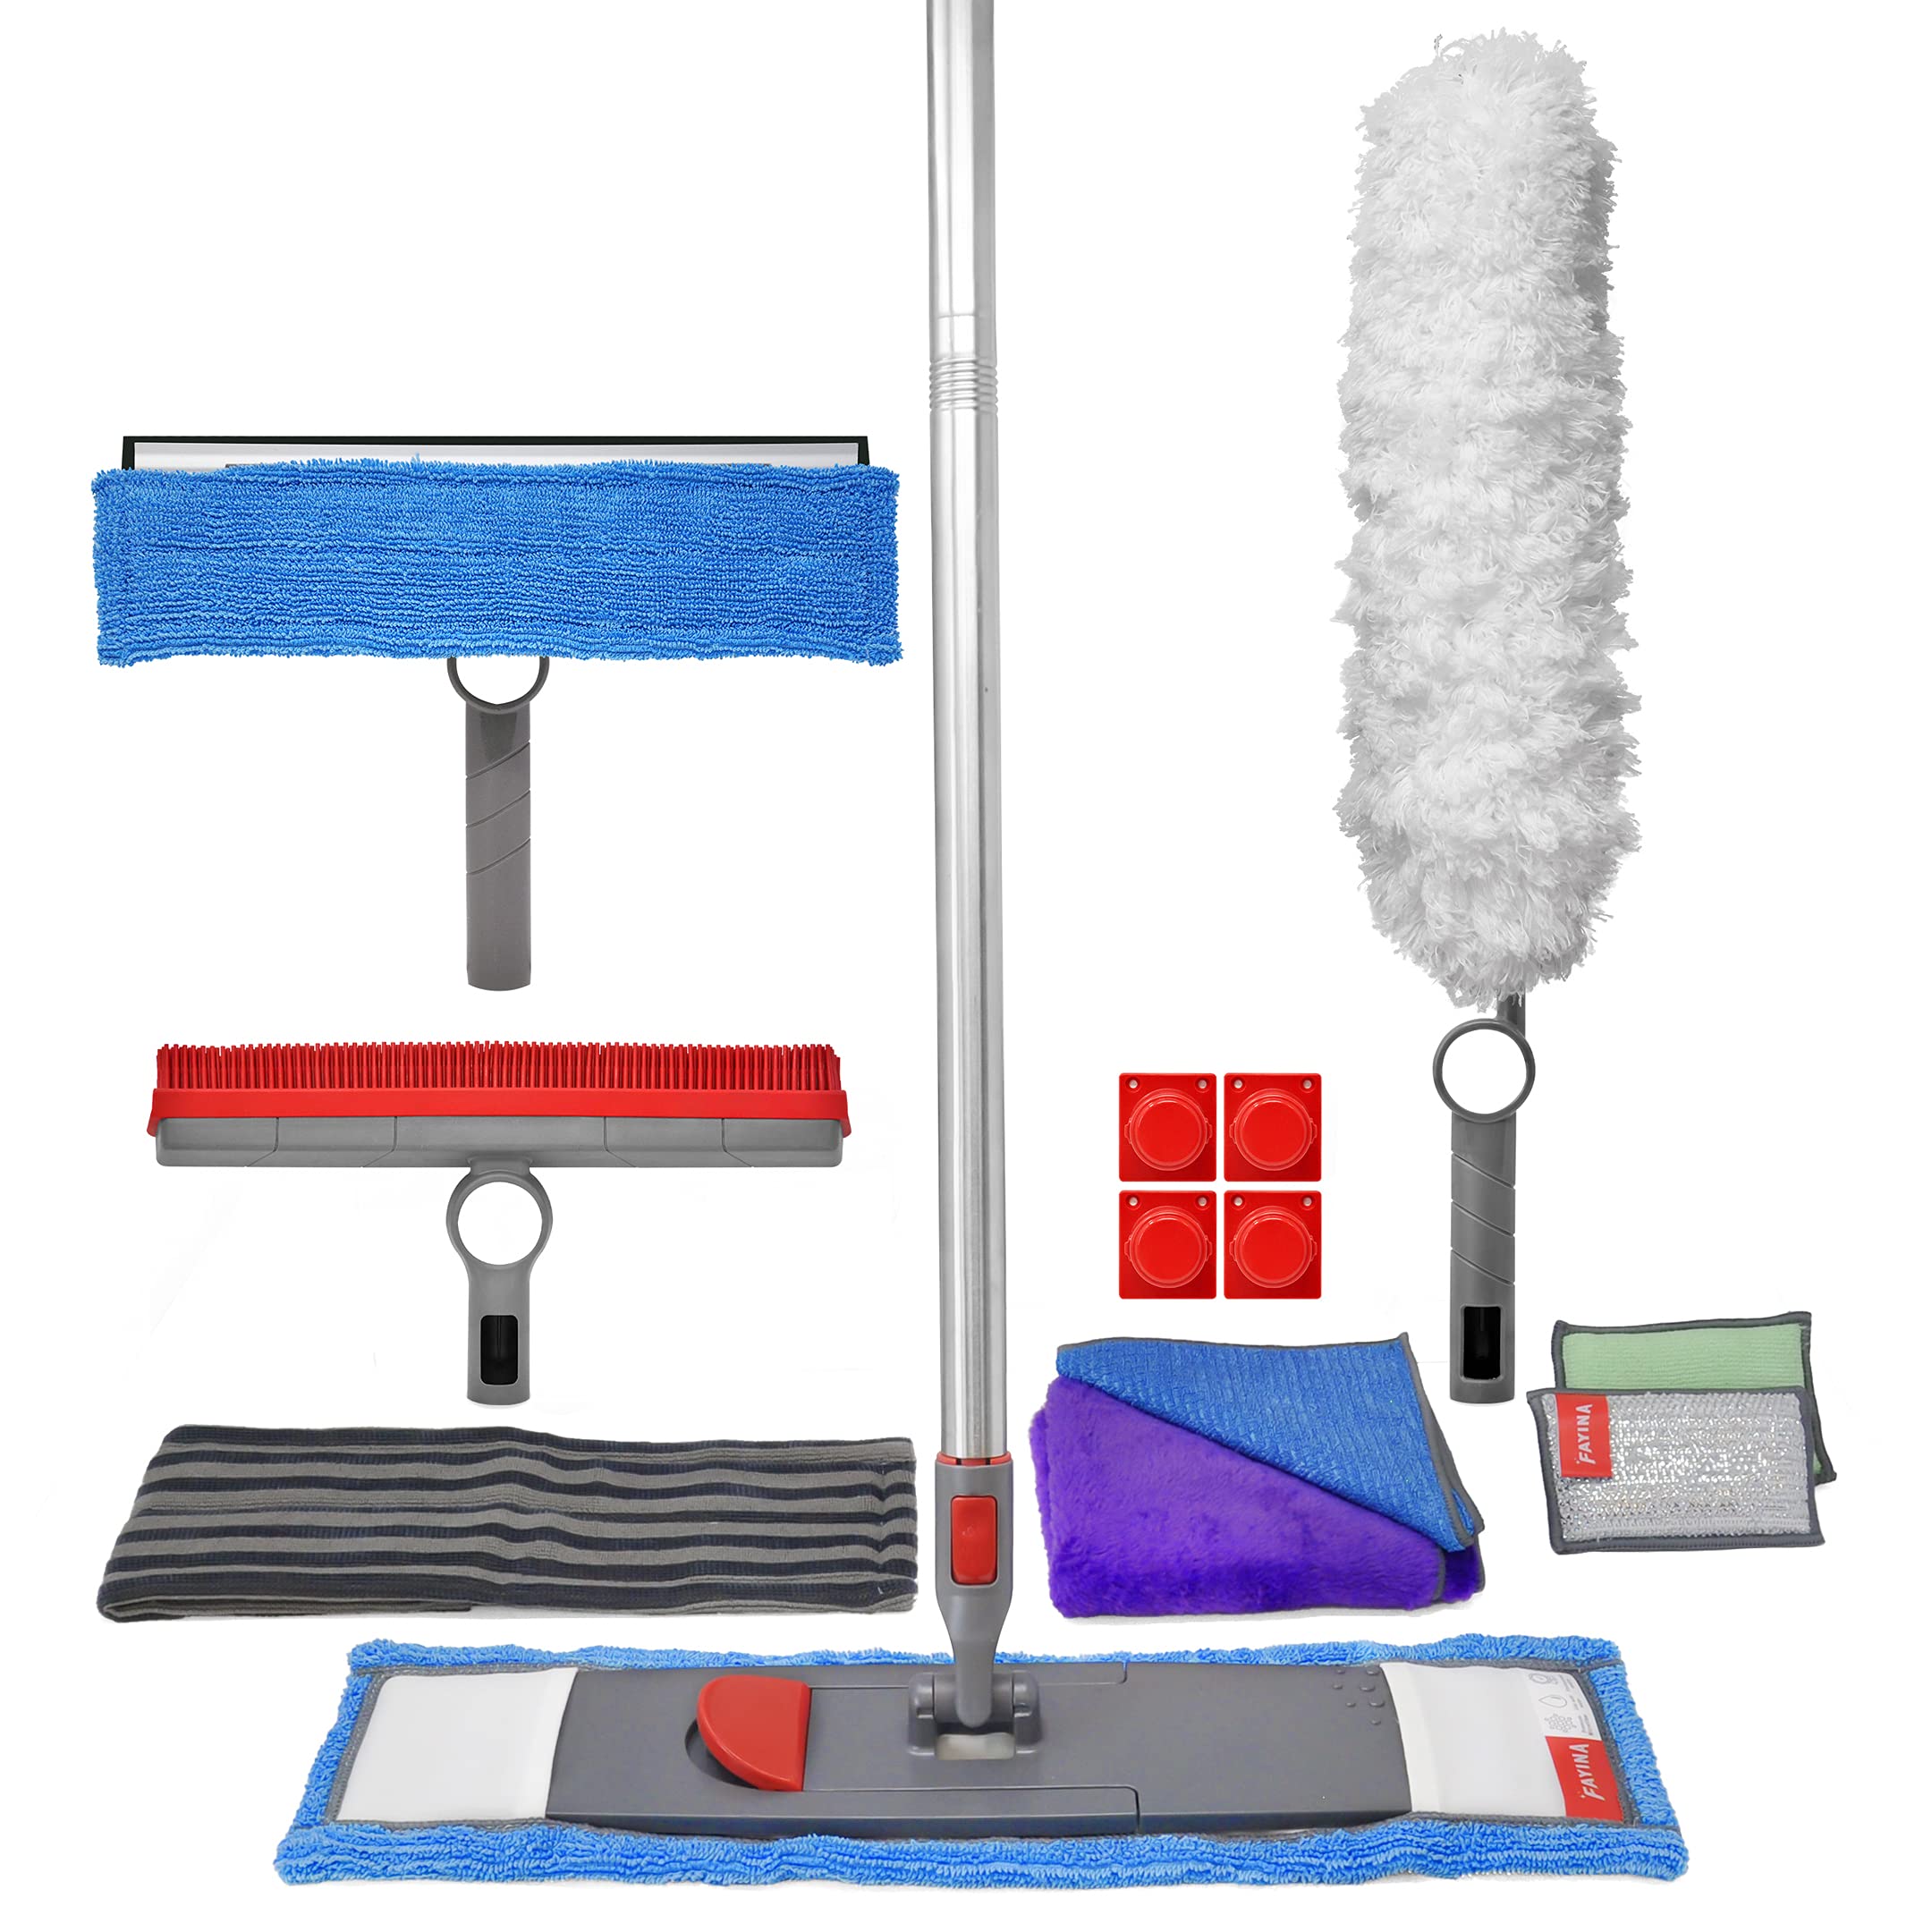 FAYINA Ultimate Cleaning System Kit - Wet Flat Floor Mop, Rubber Brush, Microfiber Duster, Window Cleaner w/ Squeegee, 2 Microfiber Cloths and 2 Dish Sponges